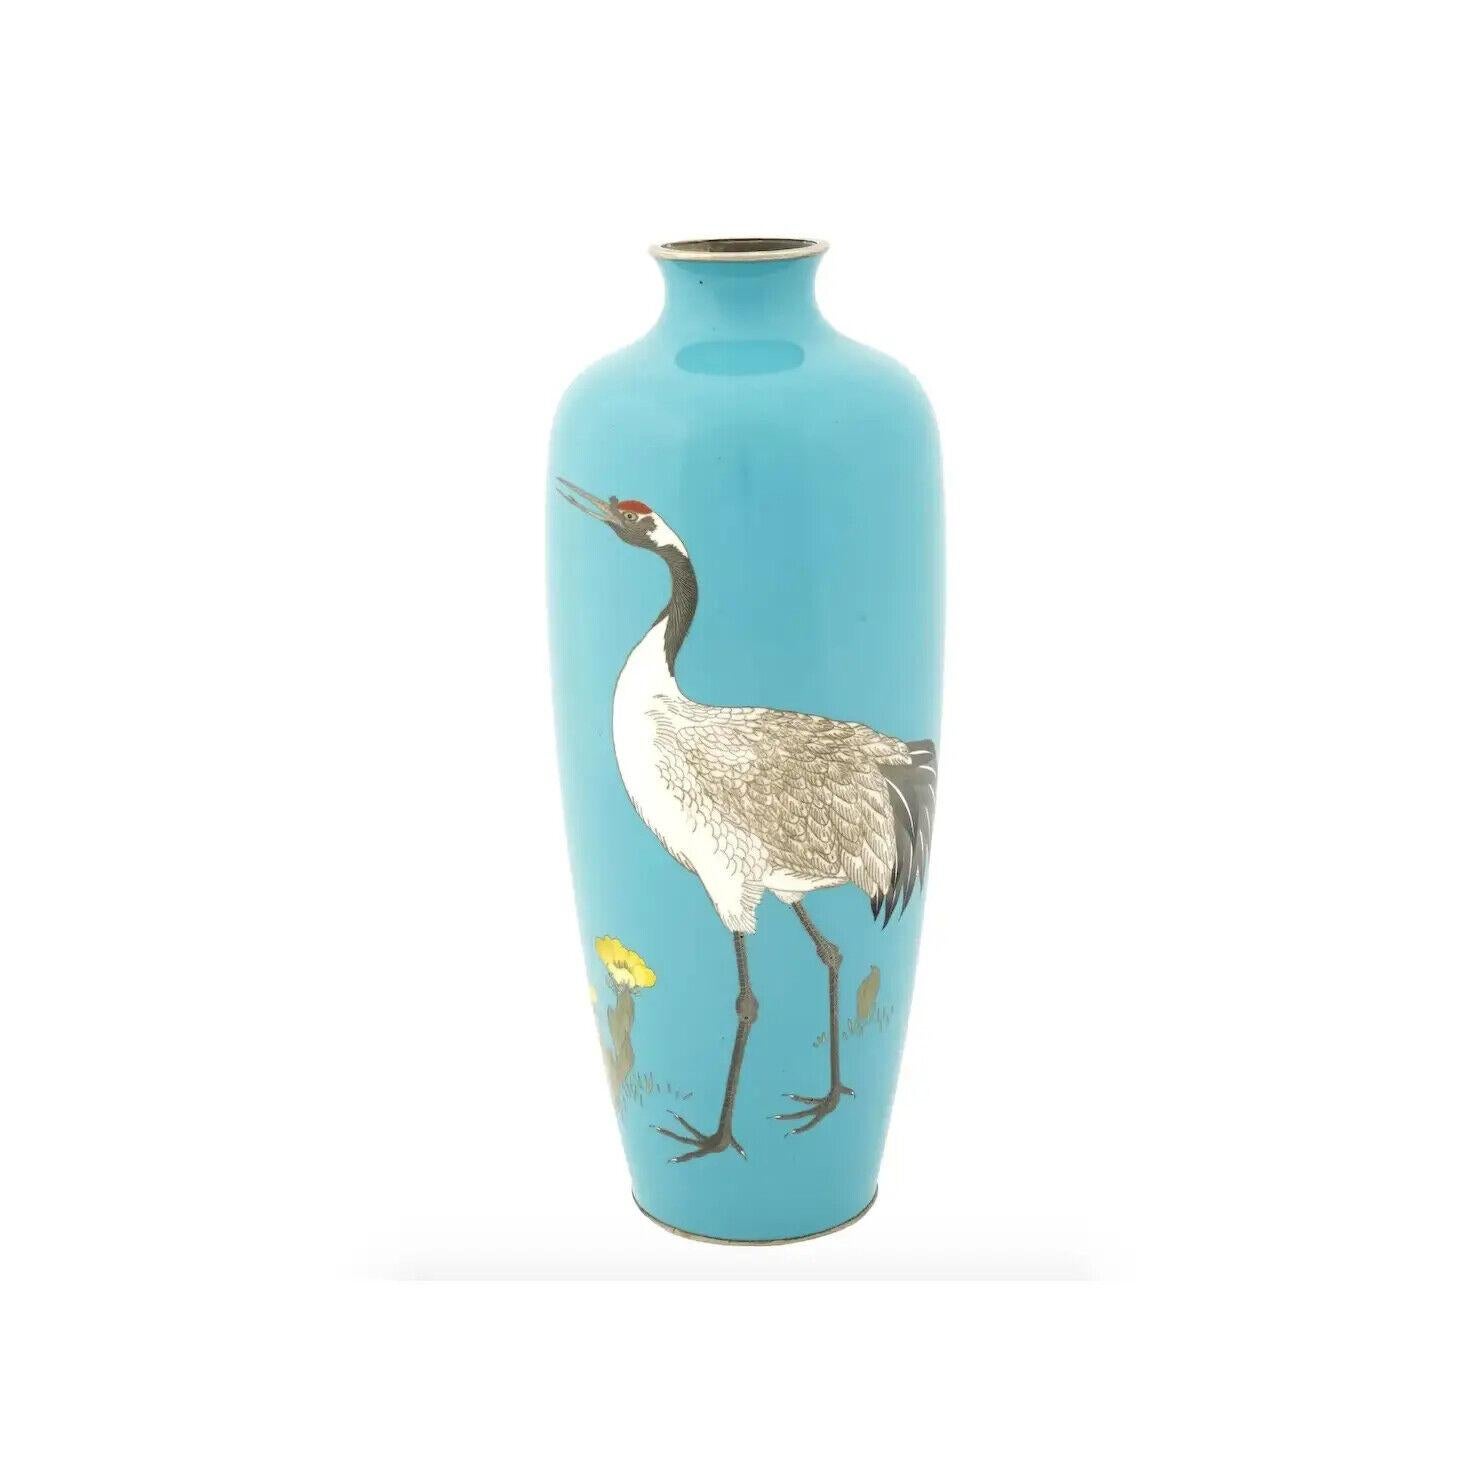 A fine antique Japanese enamel brass vase featuring an elongated body with rounded shoulders and wide short neck. The surface is skillfully decorated with a polychrome cloisonne enamel image of a red-crowned crane walking among blooming yellow